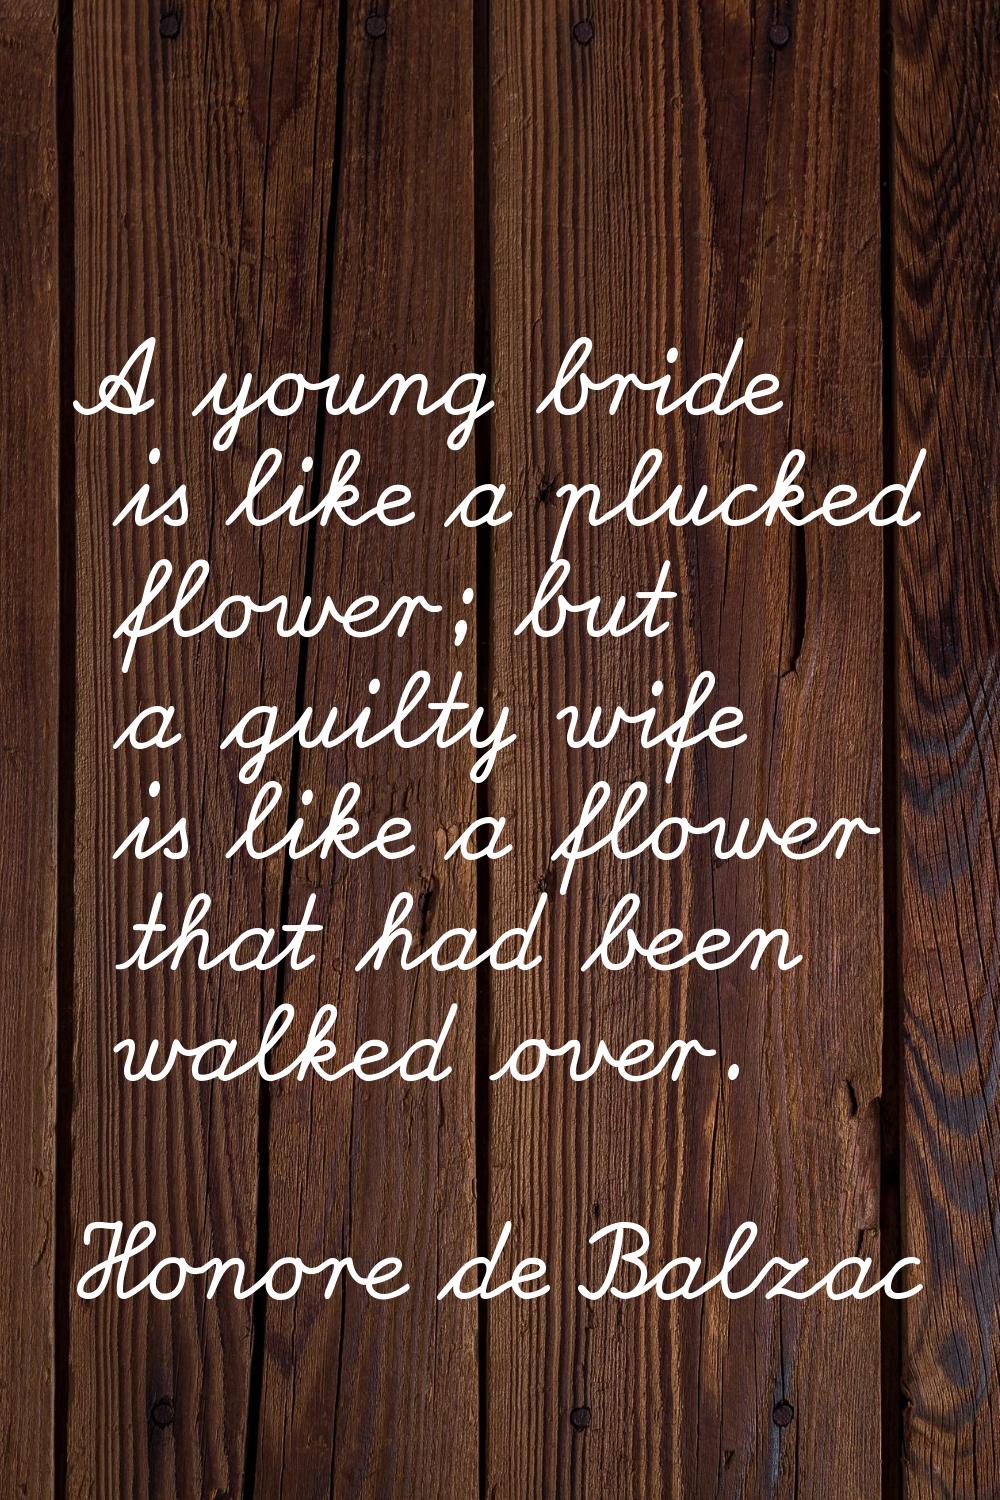 A young bride is like a plucked flower; but a guilty wife is like a flower that had been walked ove